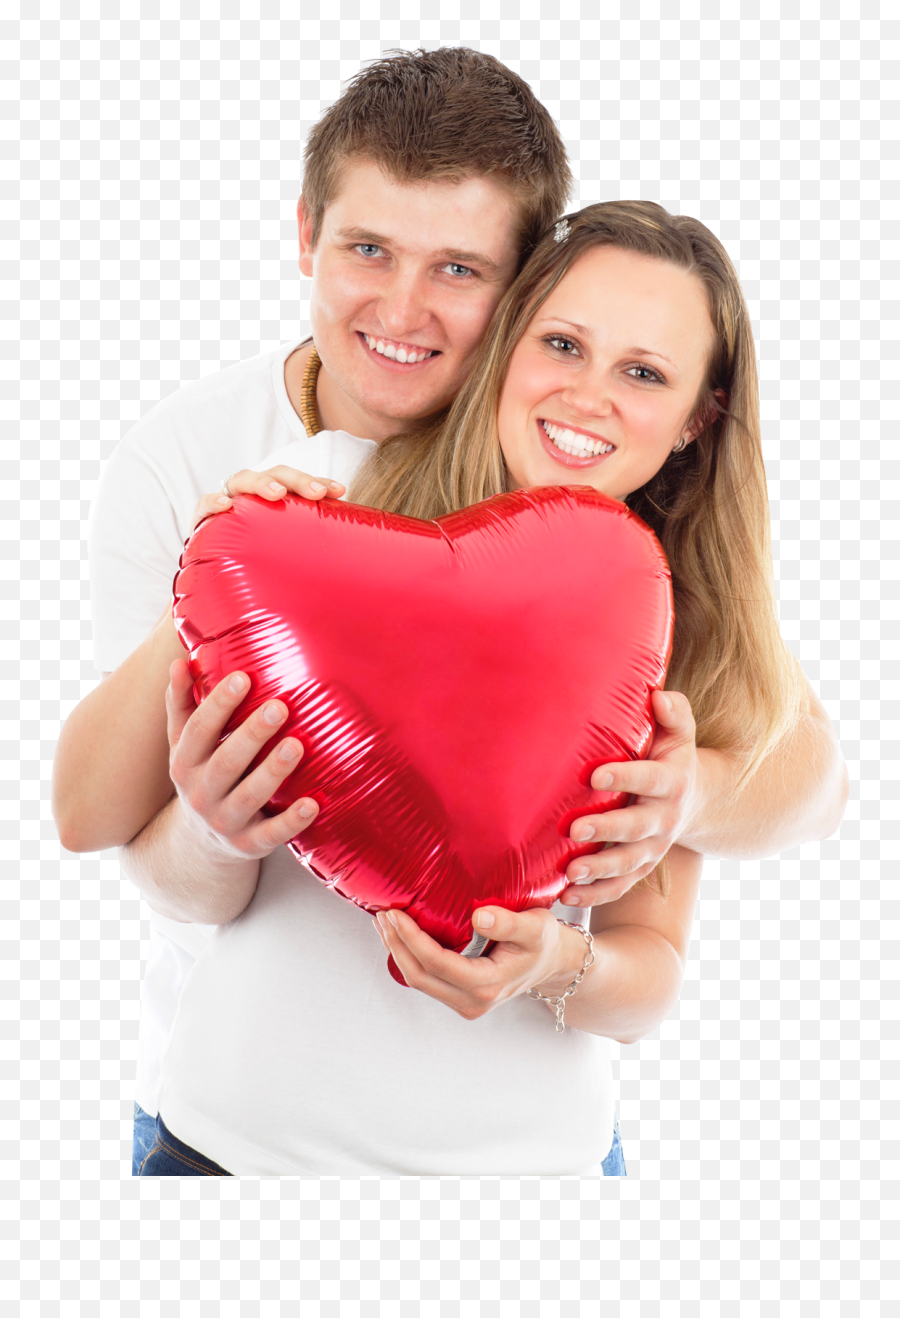 Young Couple Holding A Red Heart Pillow Png Image - Pngpix Couple In Love Png,Happy Couple Png